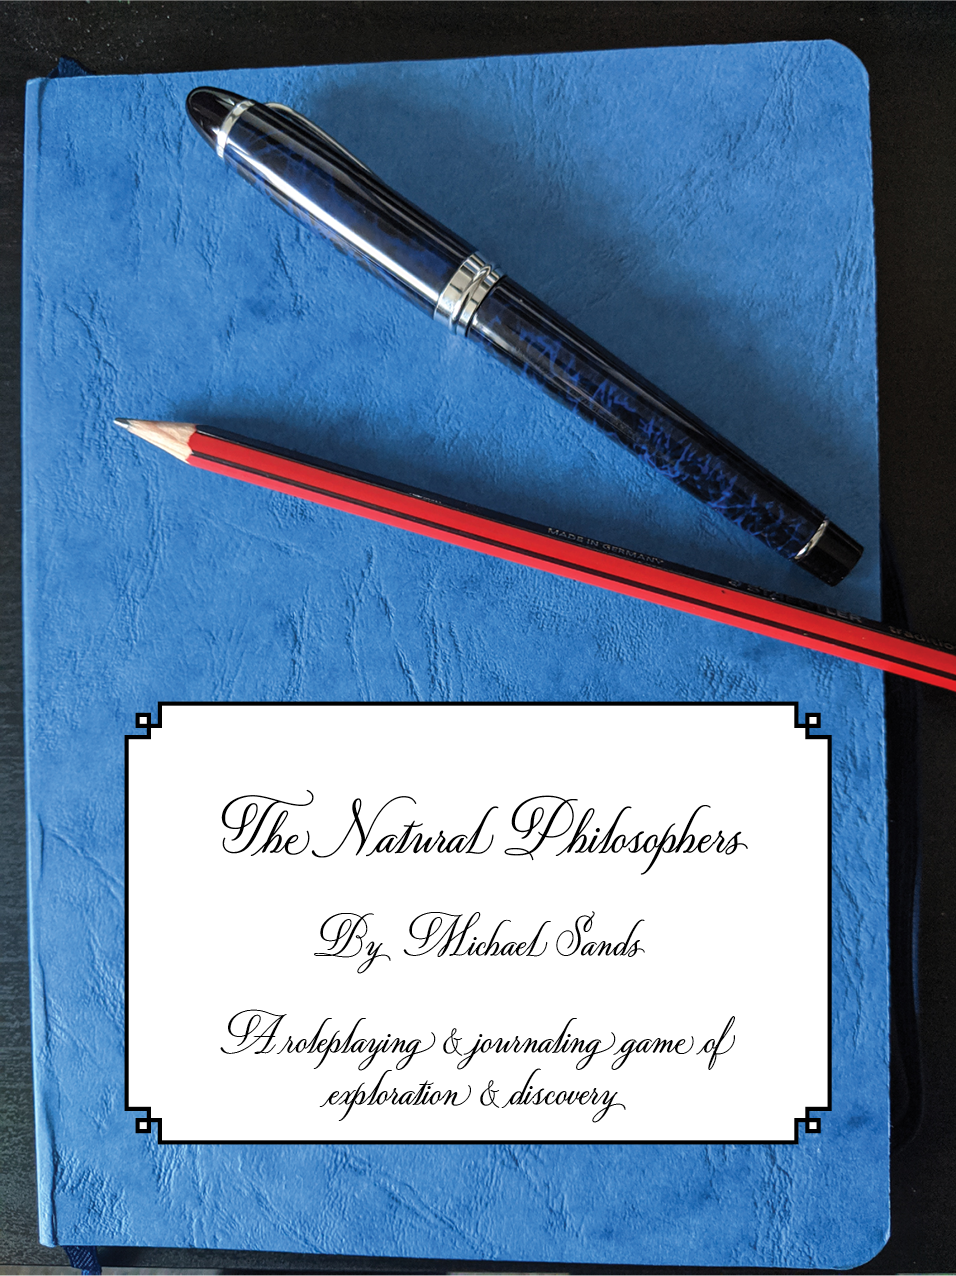 The Natural Philosophers cover, showing a notebook with pens and pencils